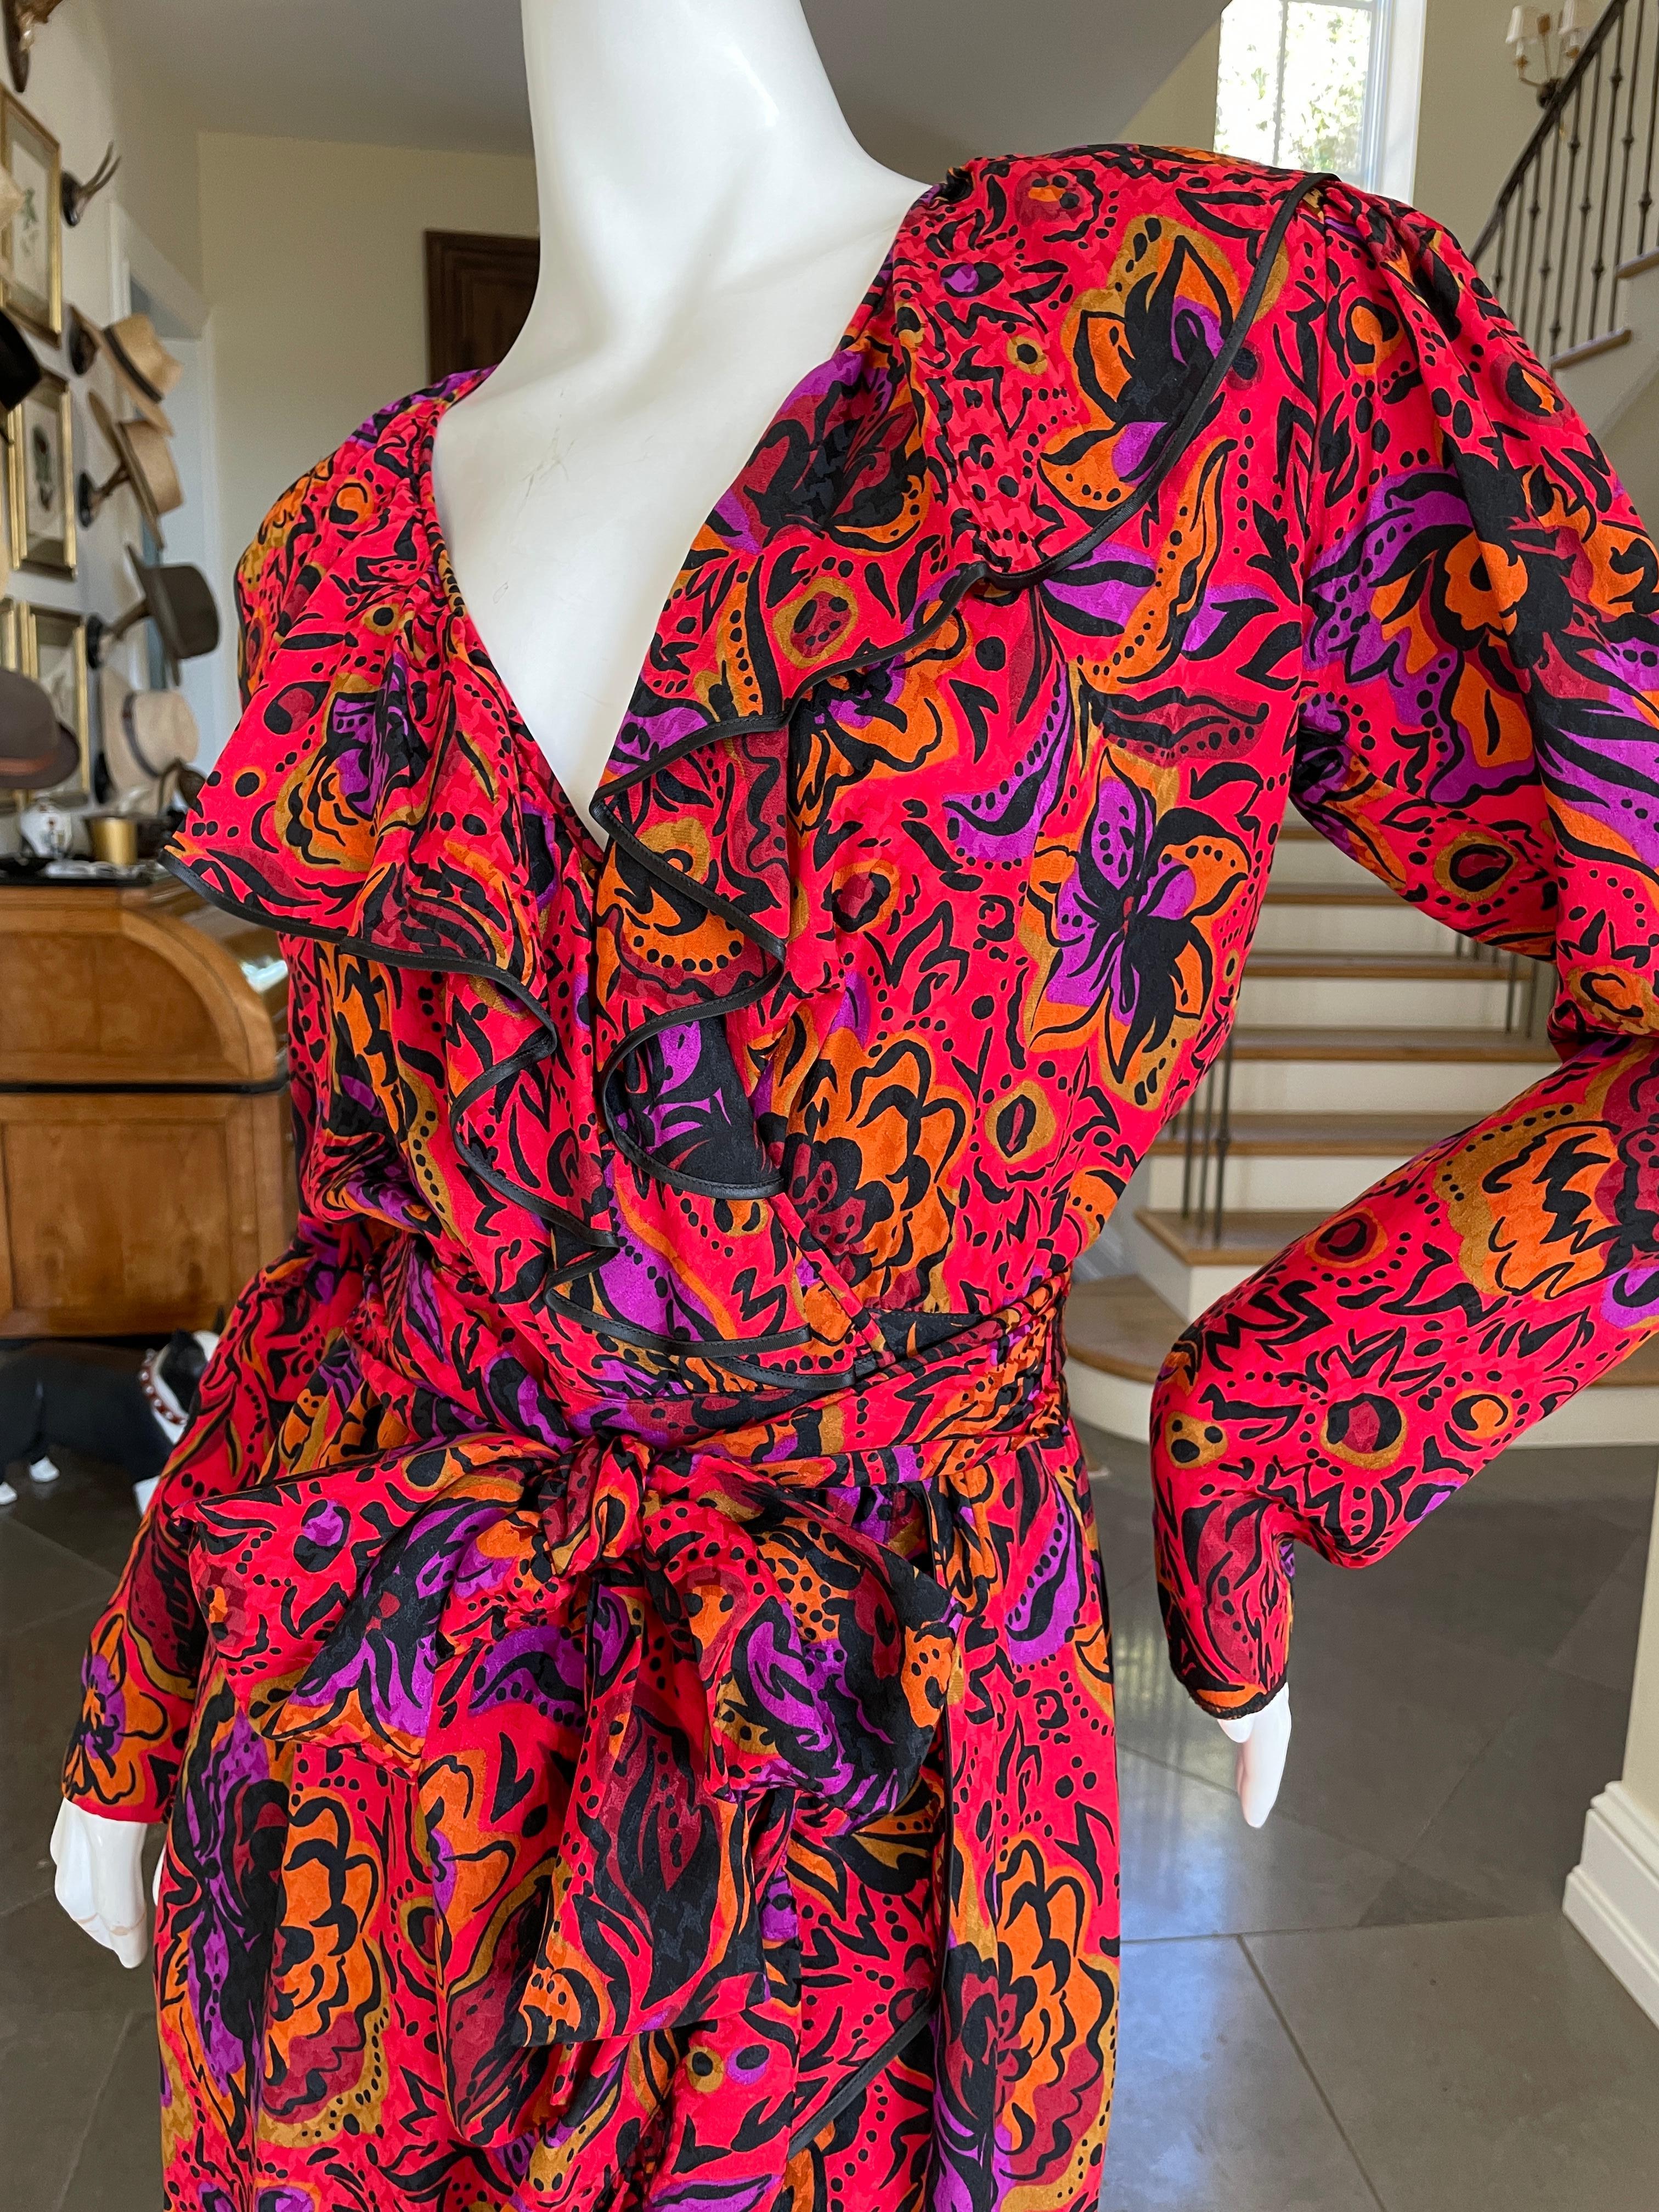 Yves Saint Laurent Rive Gauche 70's Ruffle Silk Floral Wrap Dress with Sash Belt In Excellent Condition For Sale In Cloverdale, CA